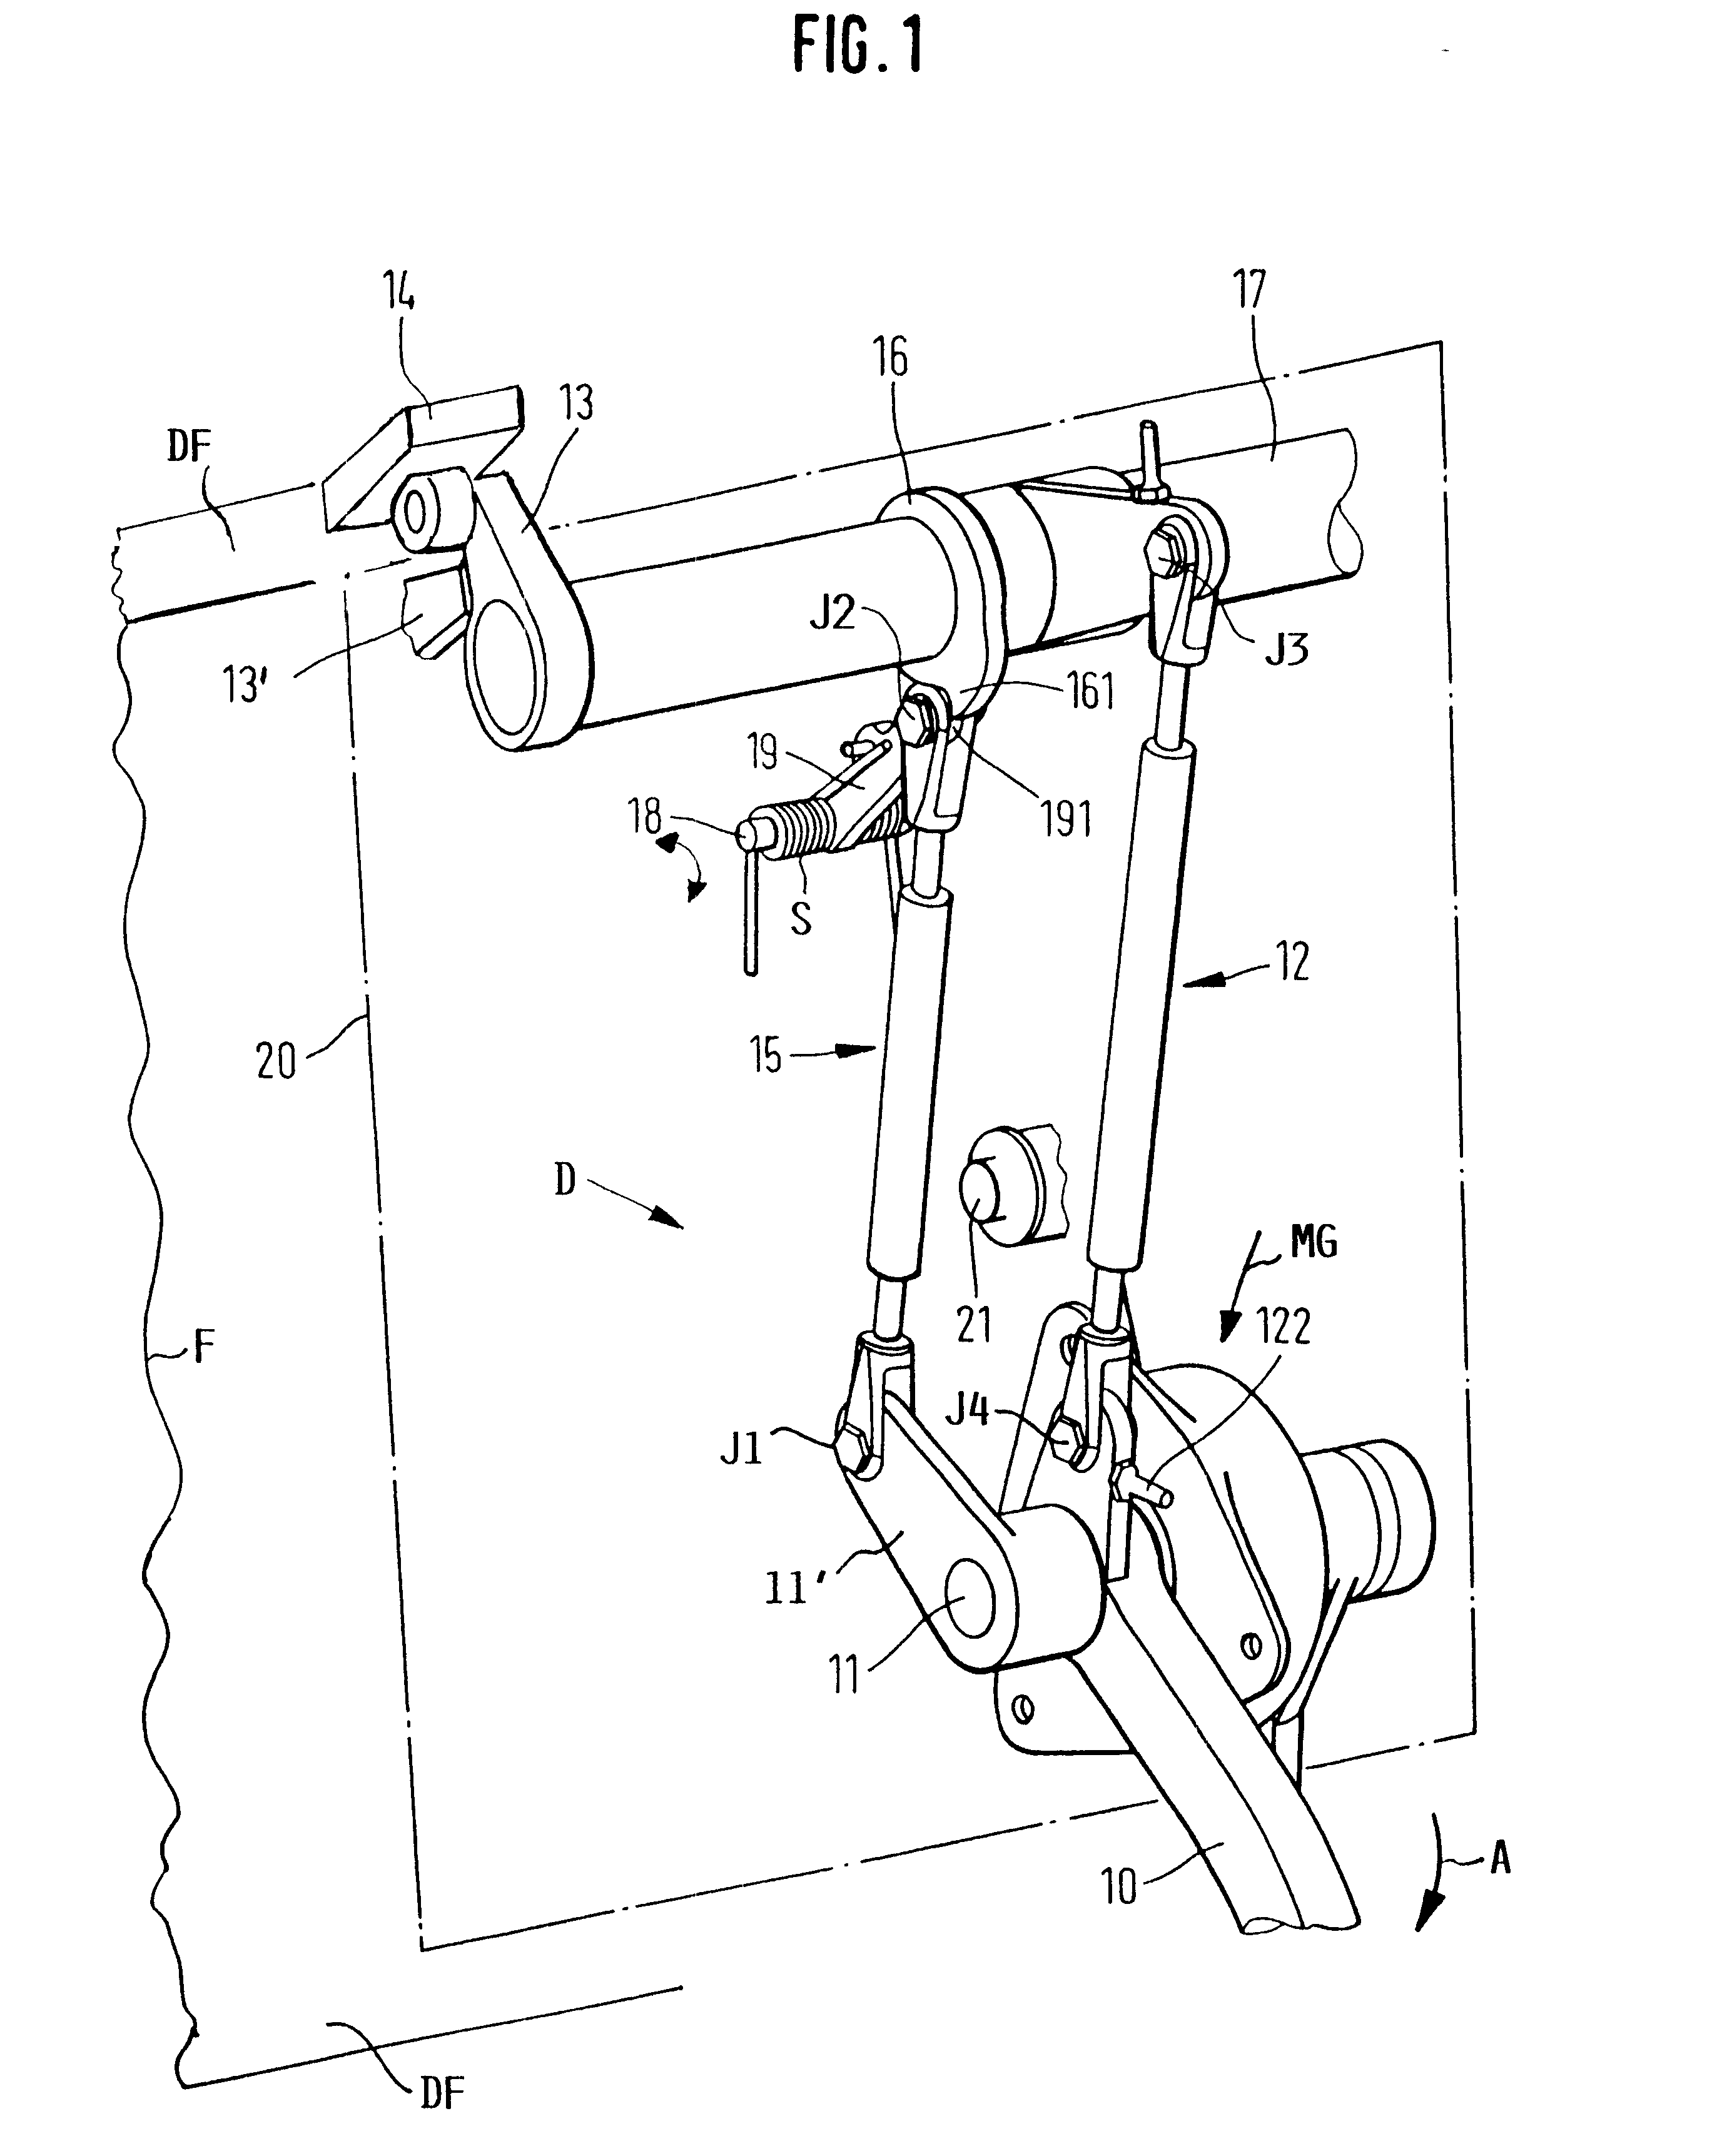 Method and device for closing a door of an aircraft